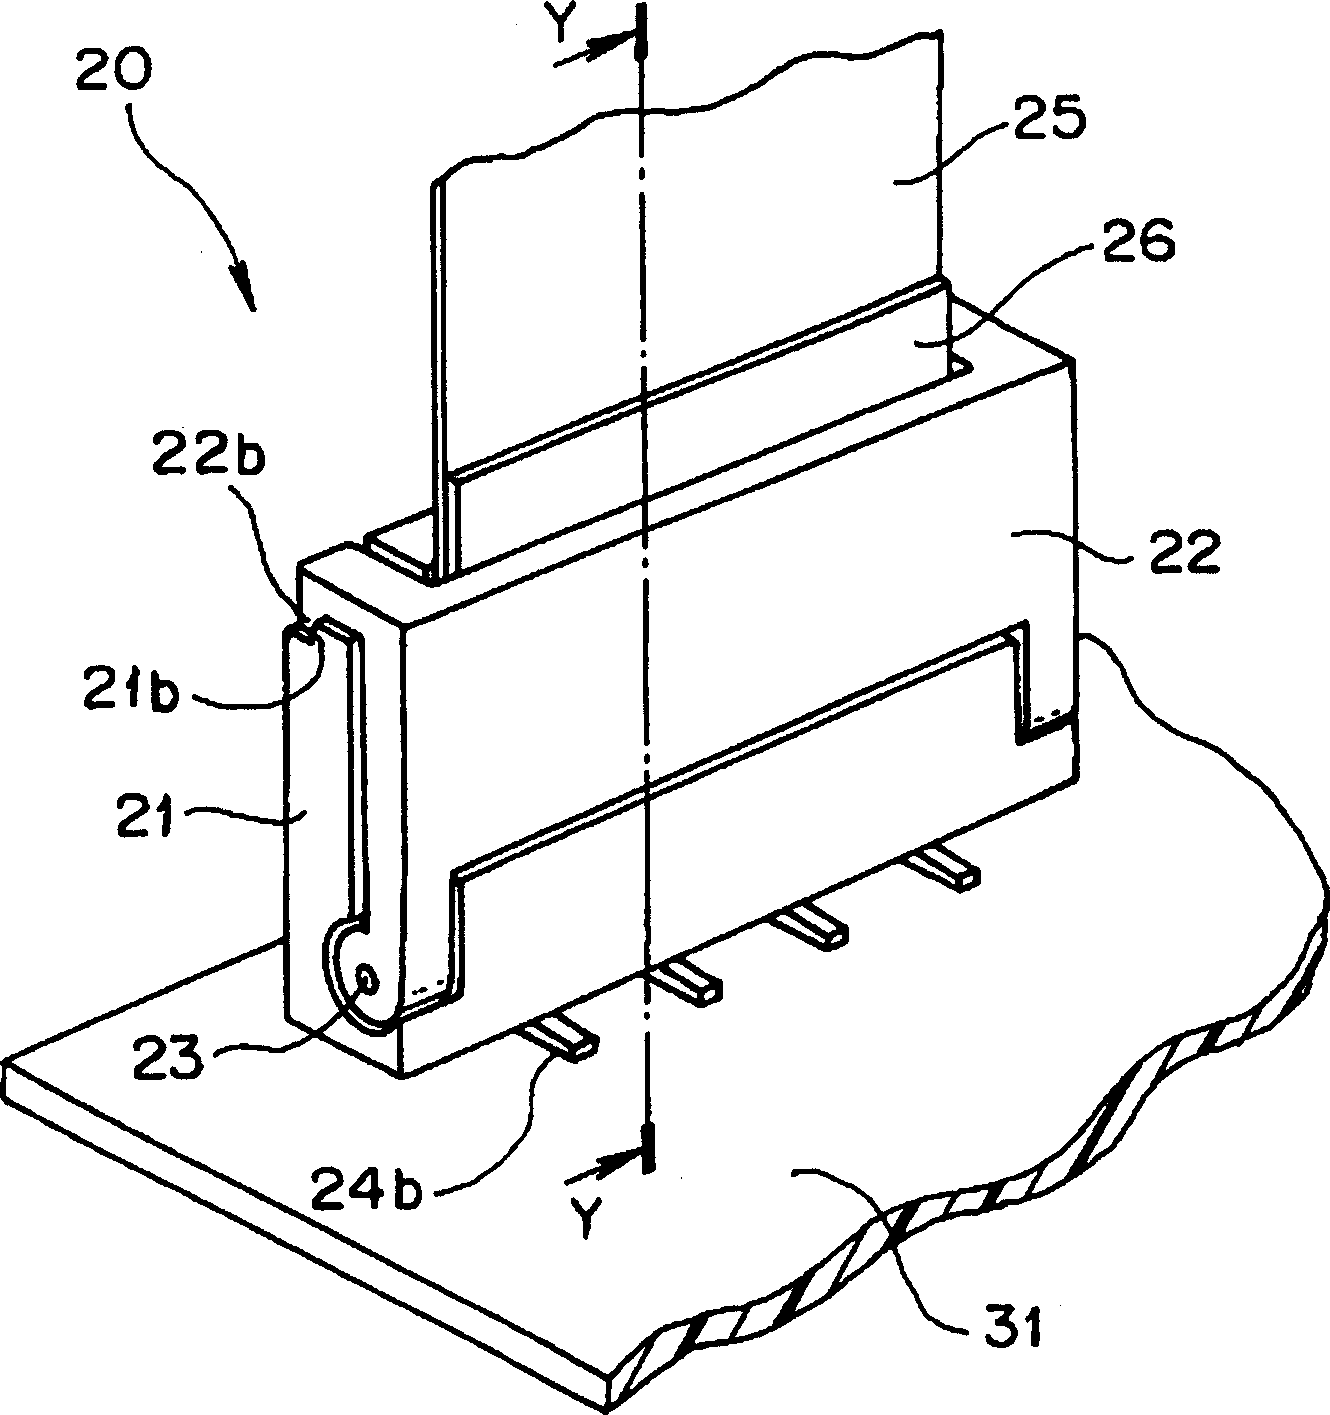 Connector for connecting flexible printed circuit tobard and flexible printed circuit board for connecting